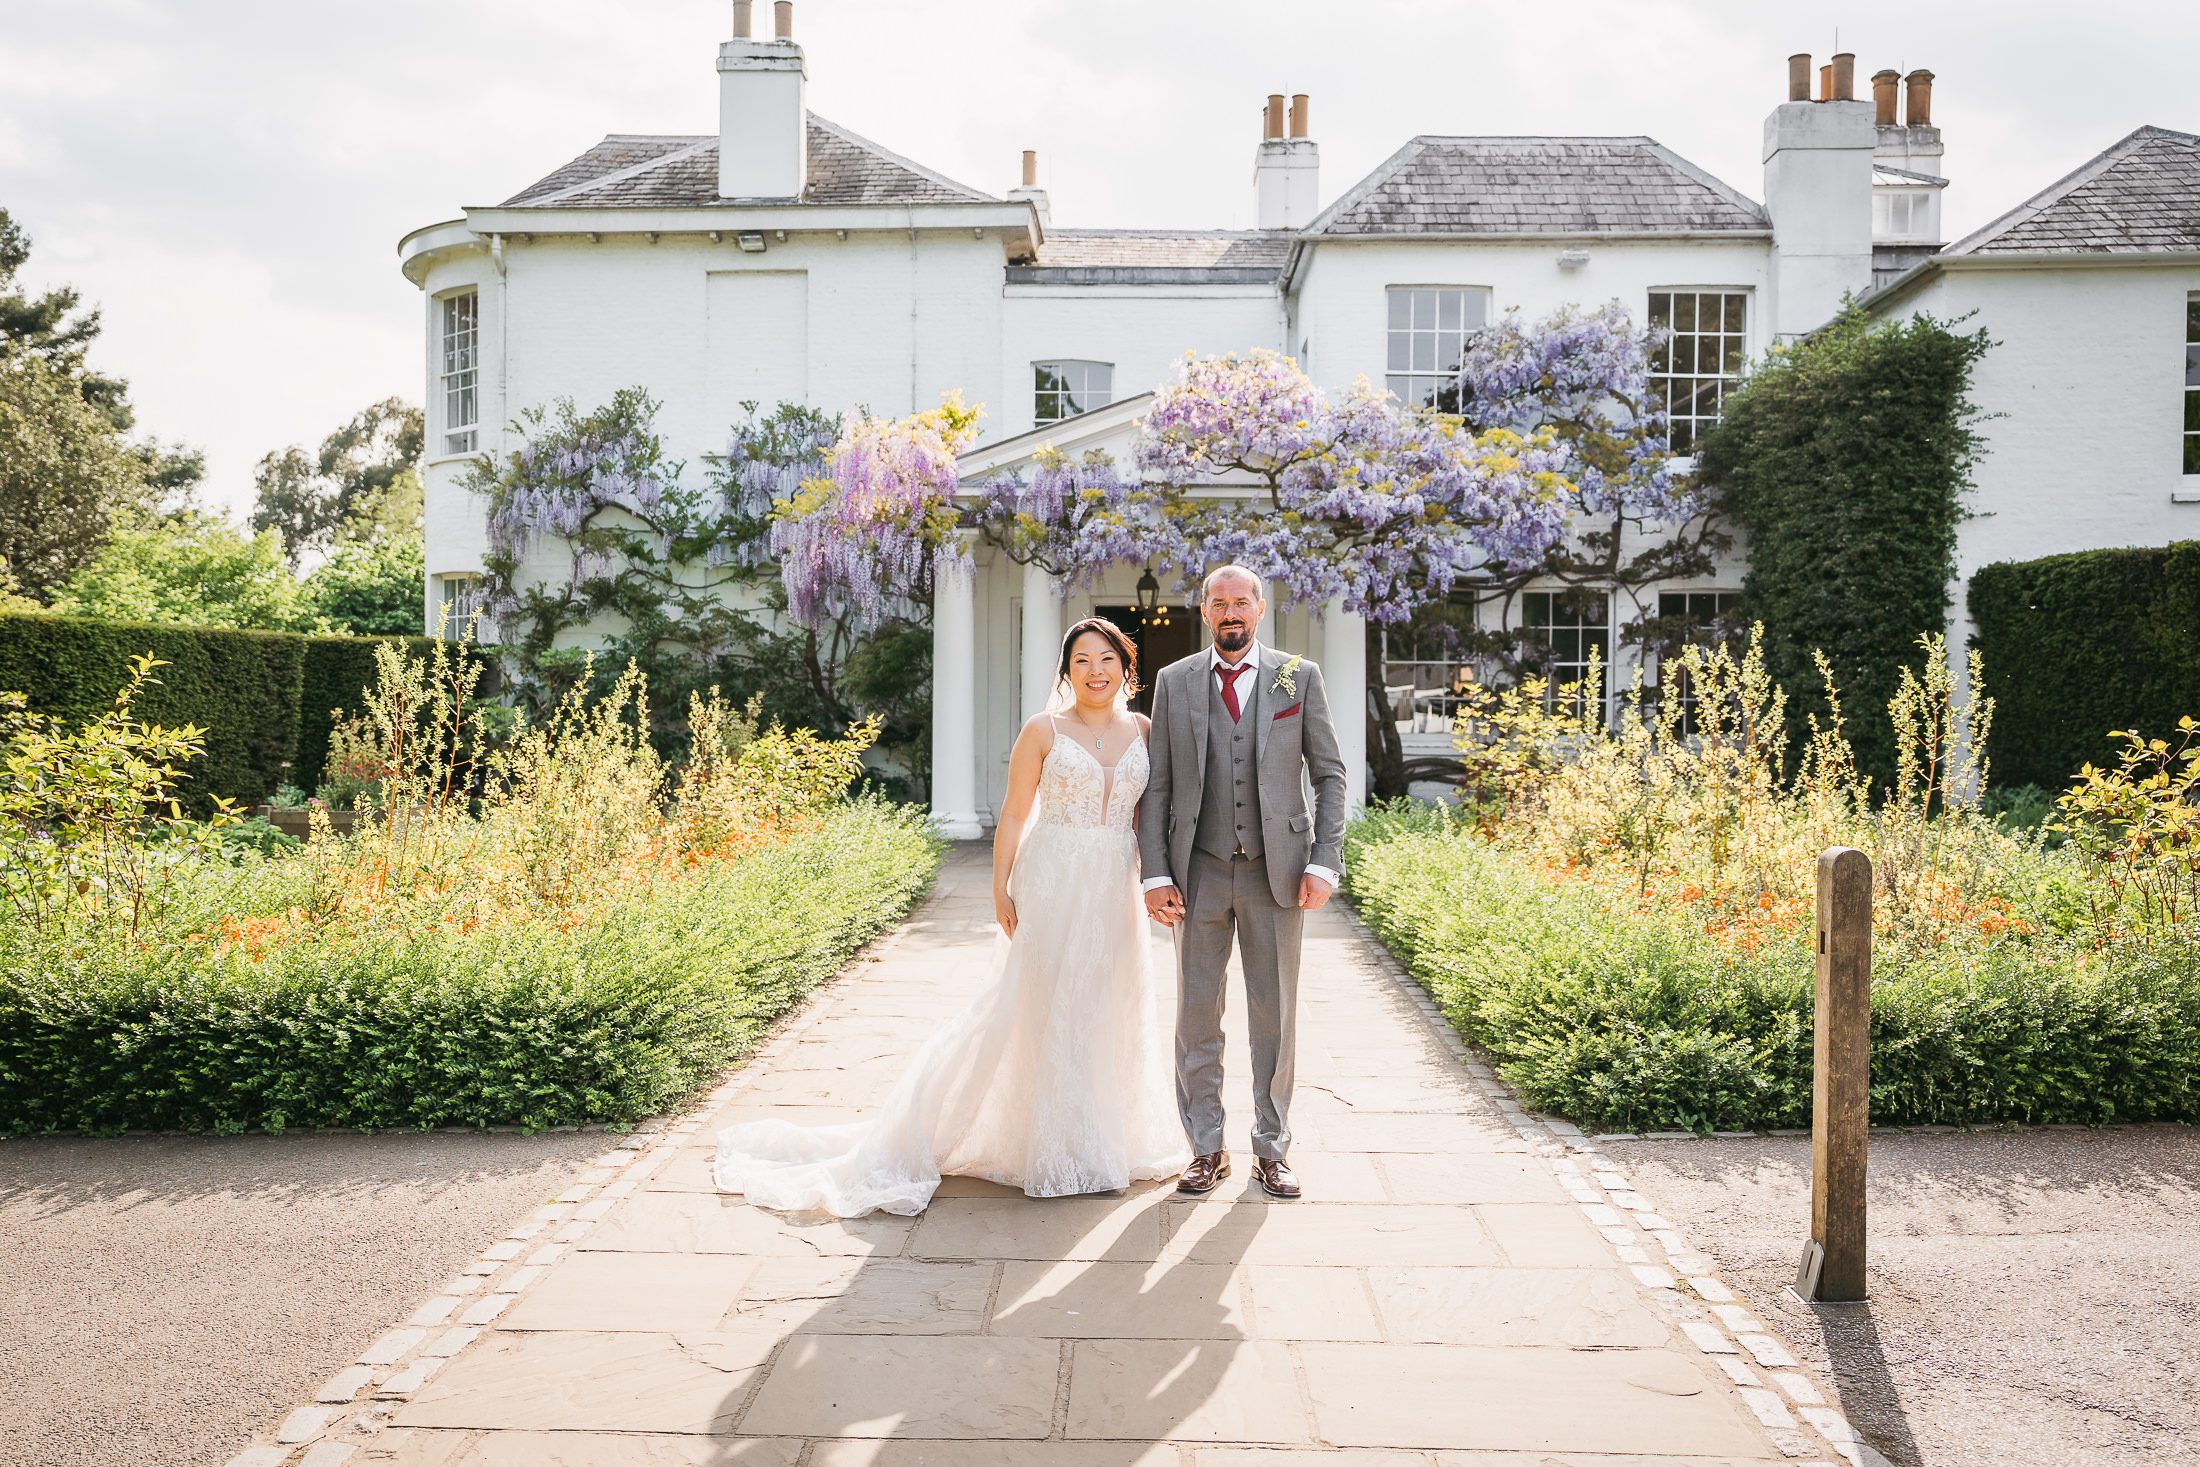 Pembroke Lodge wedding photography during May when the Wisteria is in full bloom.